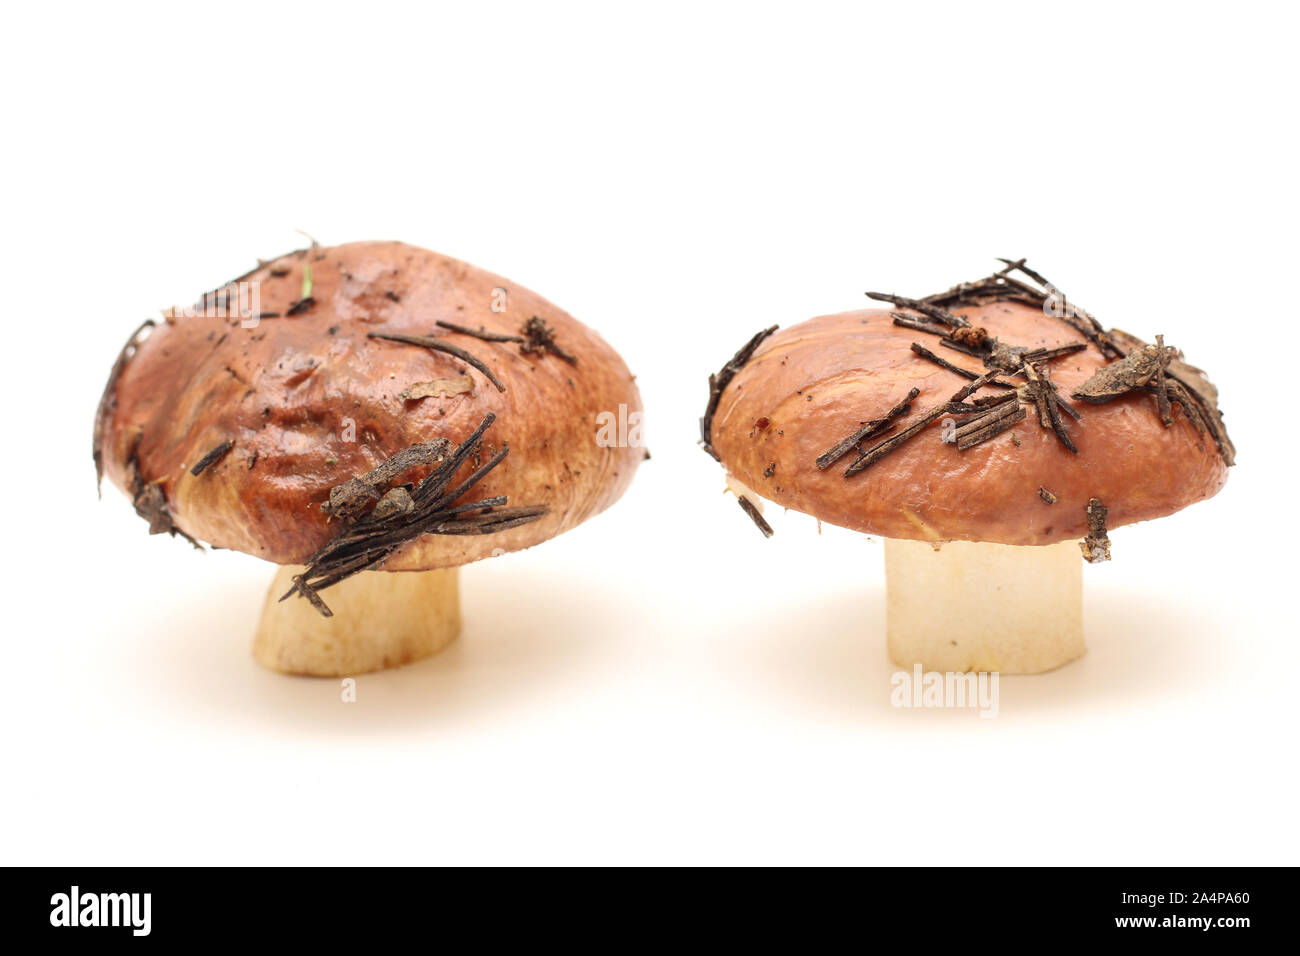 Two dirty, unpeeled standing on tube Suillus mushrooms isolated on a white background. Stock Photo